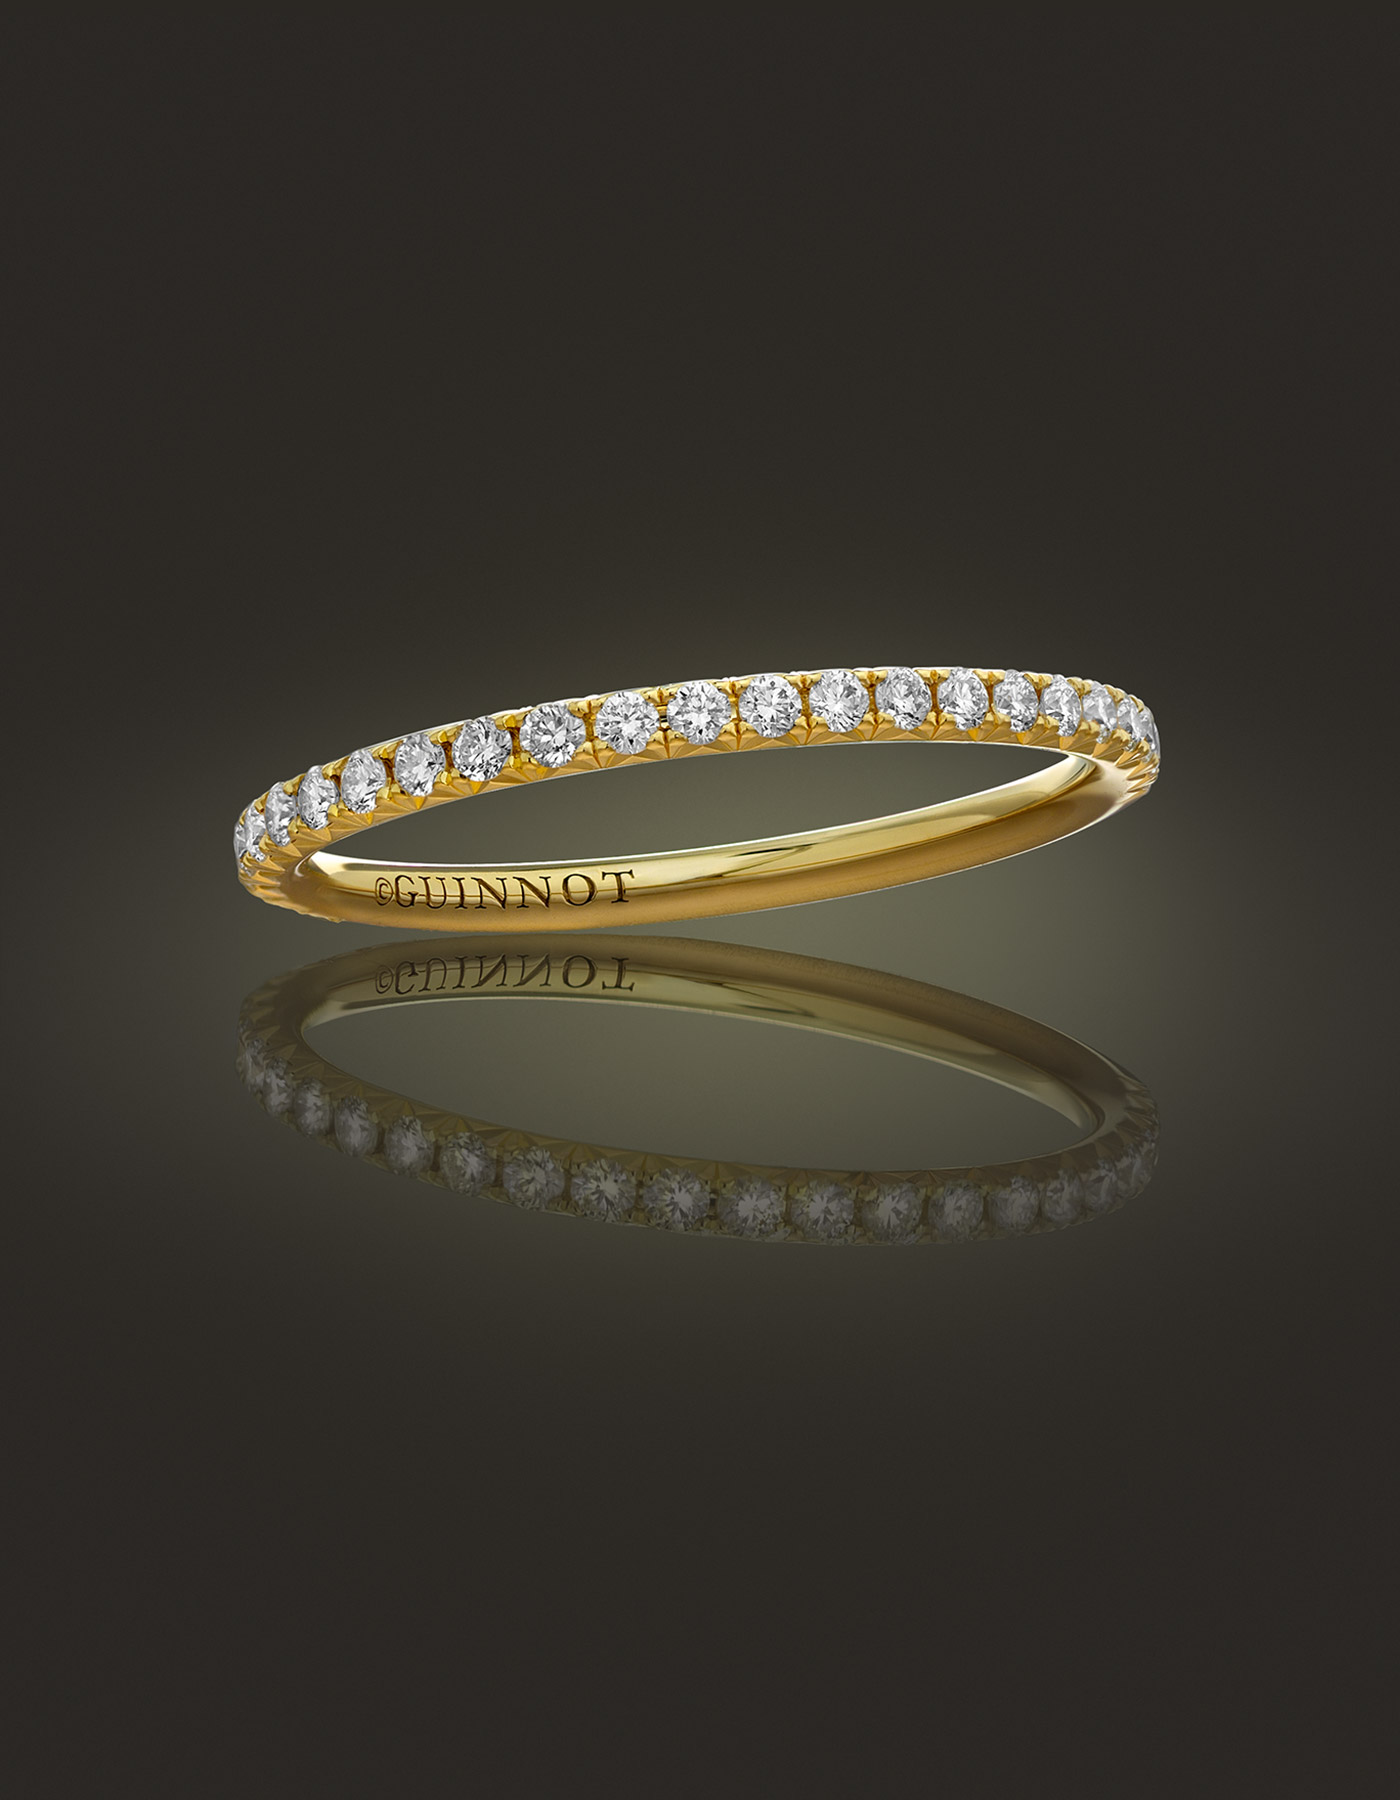 Guinnot Anonymous Diamond microband eternity ring in 18k yellow gold